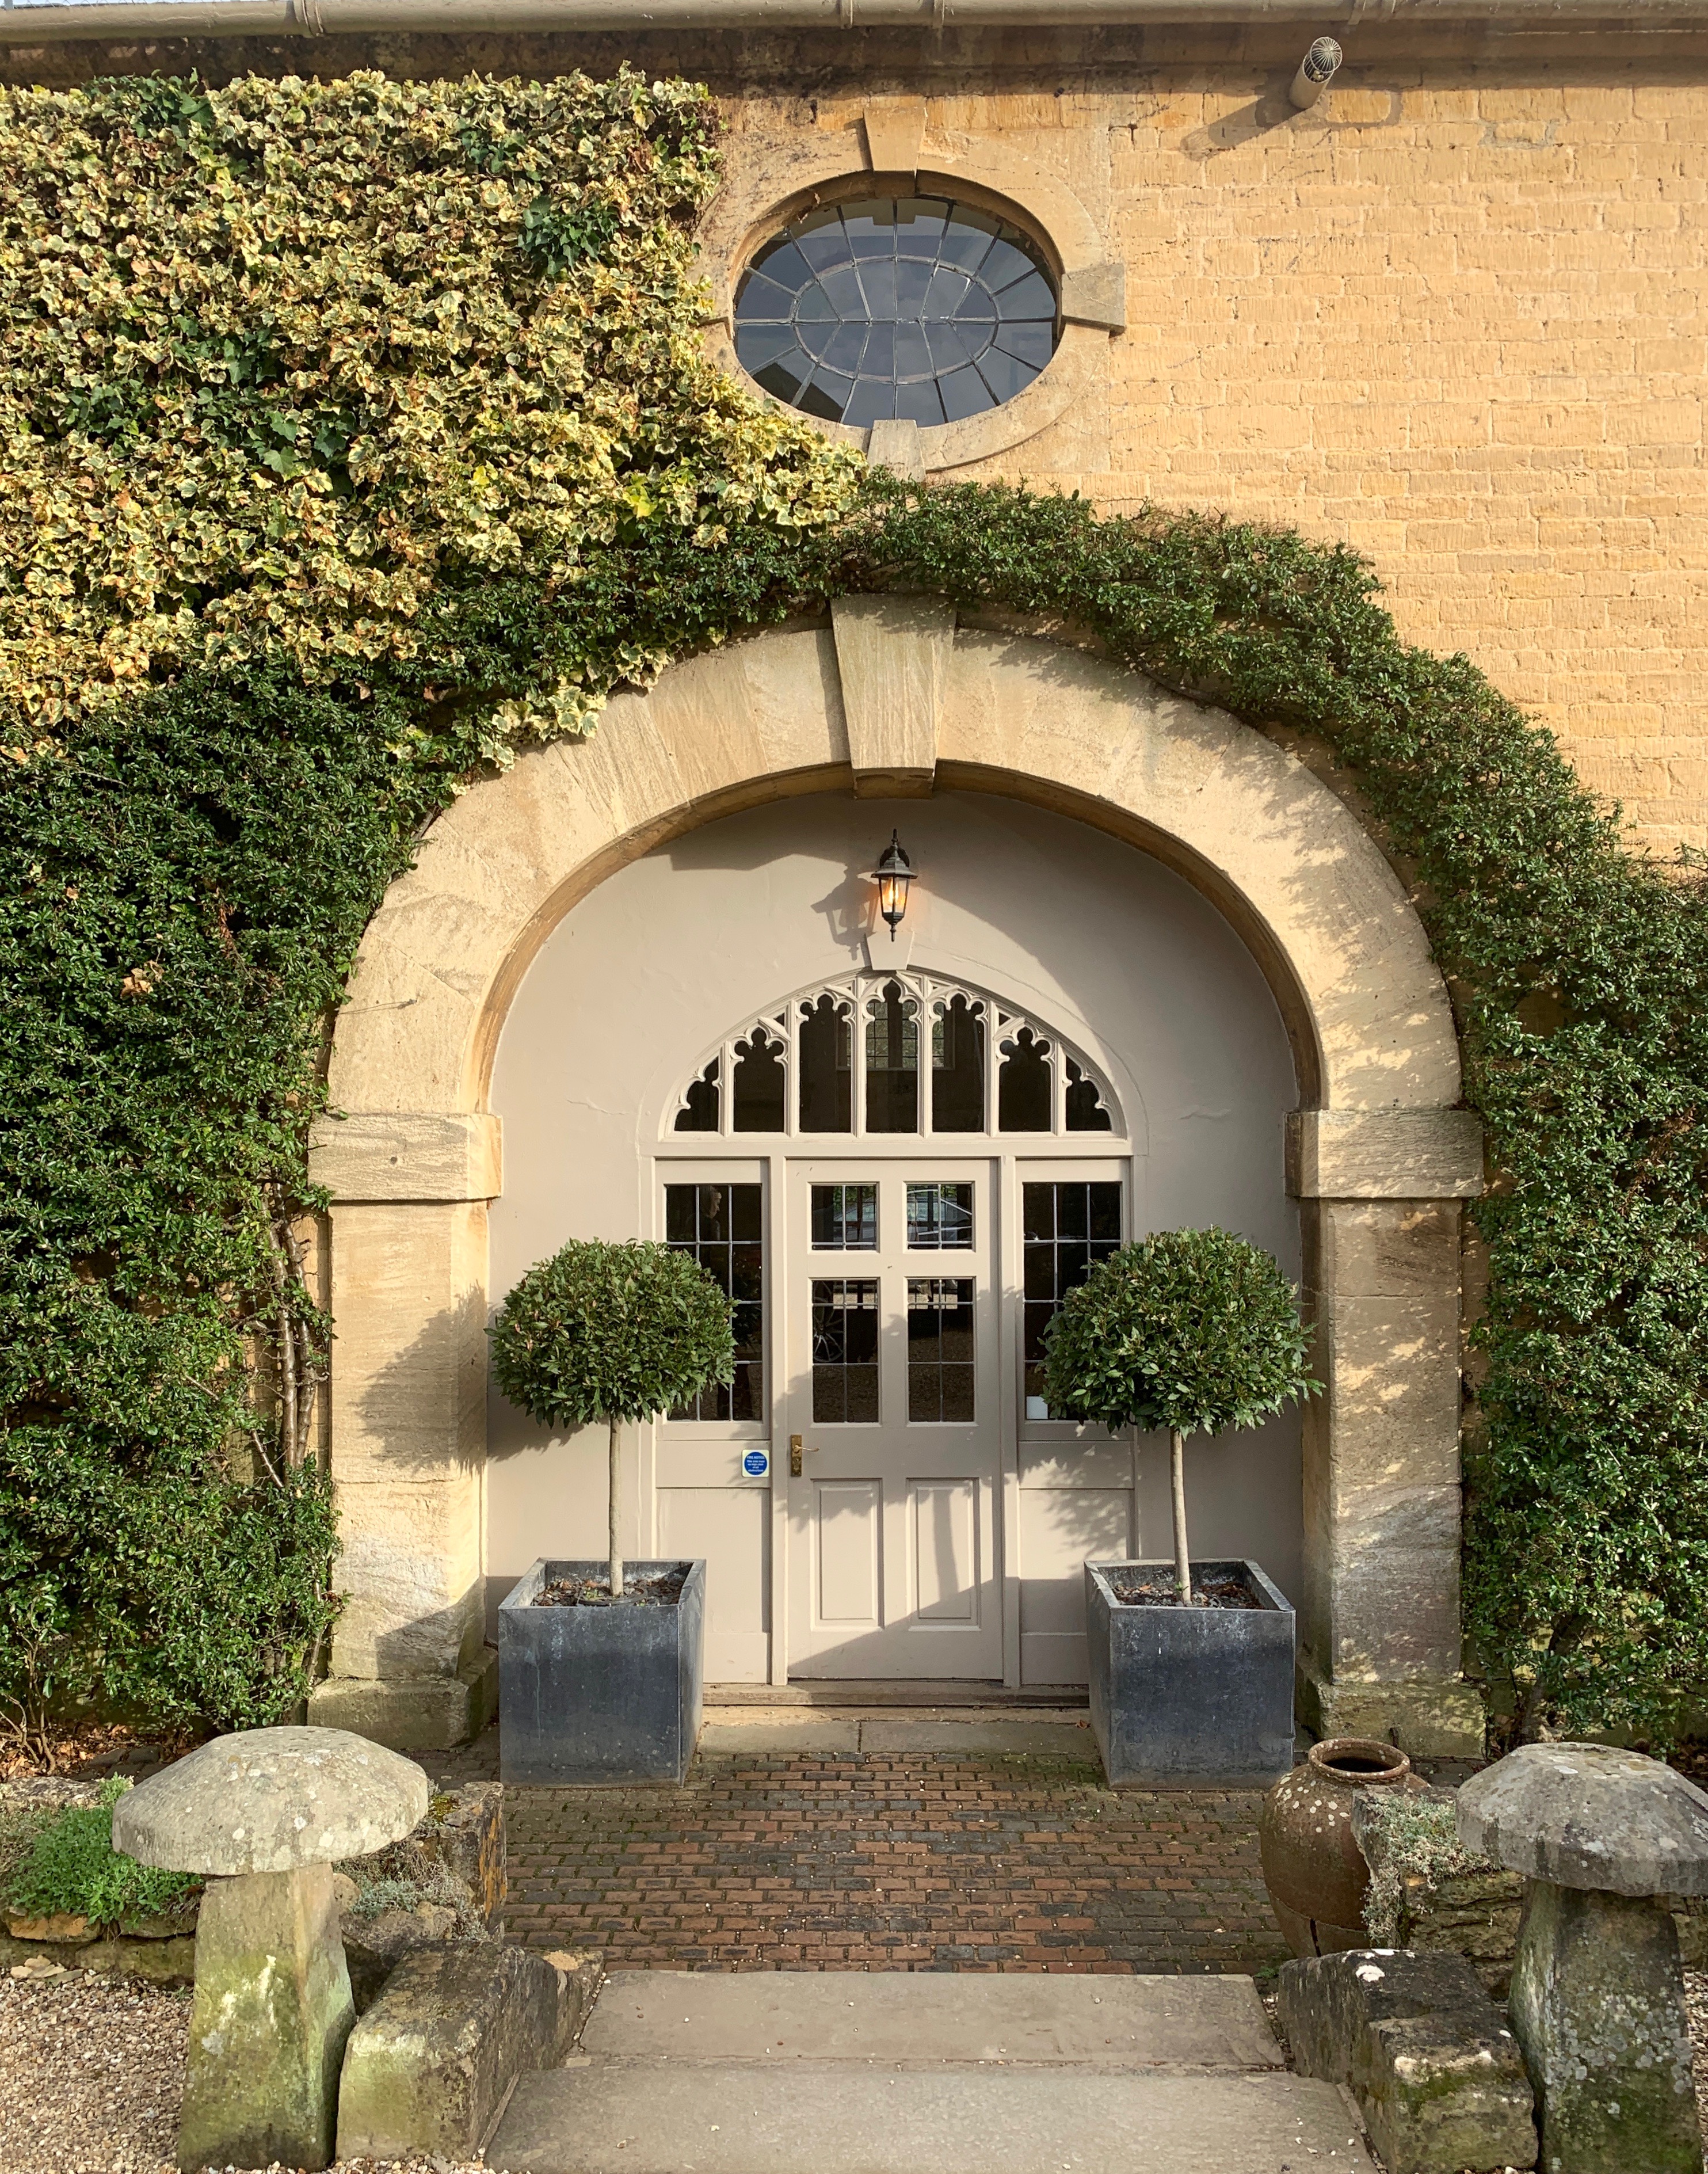 Cotswolds photo by Christina Dandar for The Potted Boxwood. 18